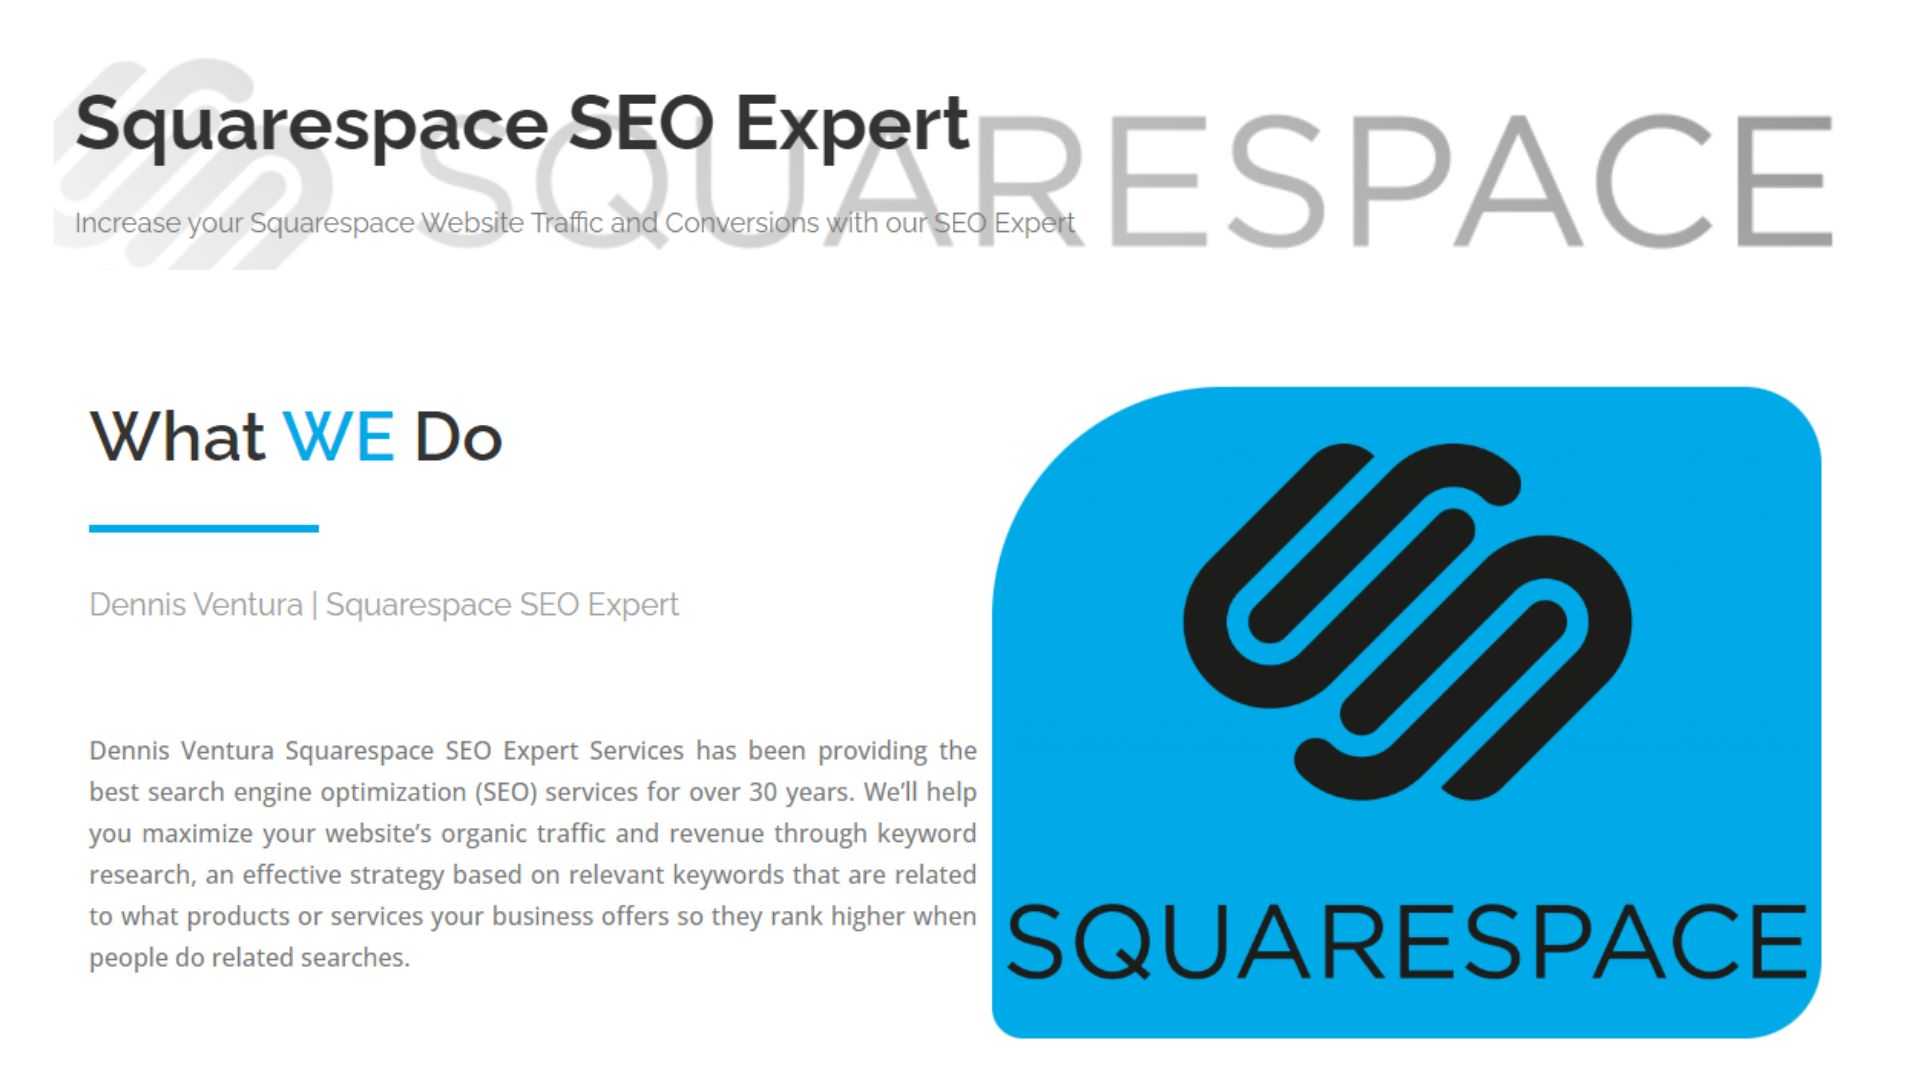 What Are The Disadvantages Of Hiring Squarespace SEO Expert?